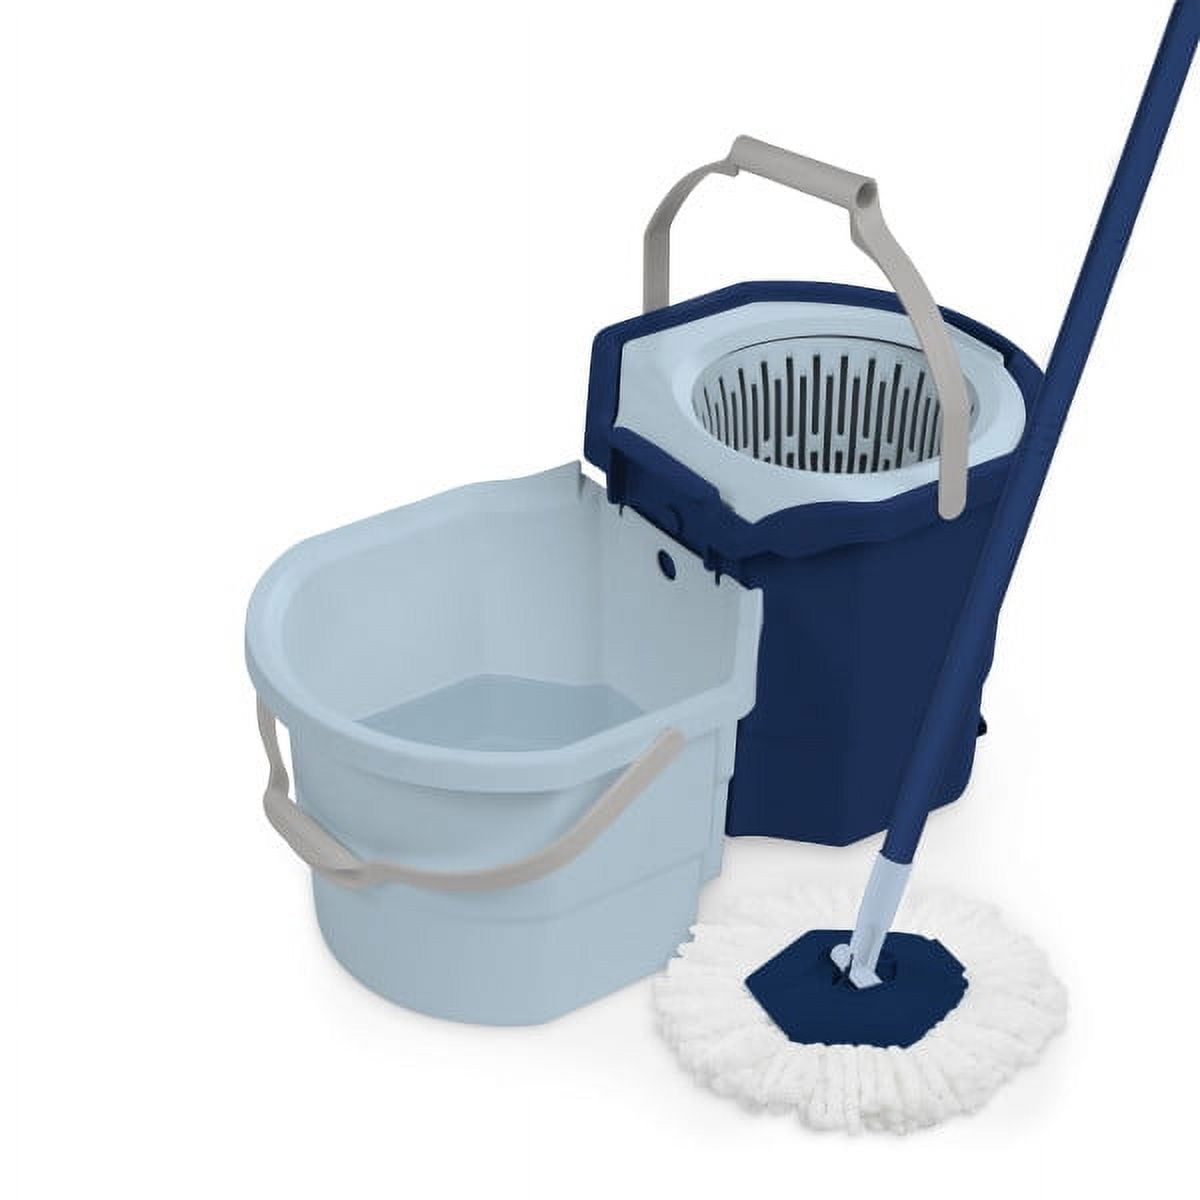 Dropship Spin Mop And Bucket With Wringer Set - For Home Kitchen Floor  Cleaning - Wet/Dry Usage On Hardwood & Tile - Upgraded Self-Balanced Easy  Press System With 2 Washable Microfiber Mops